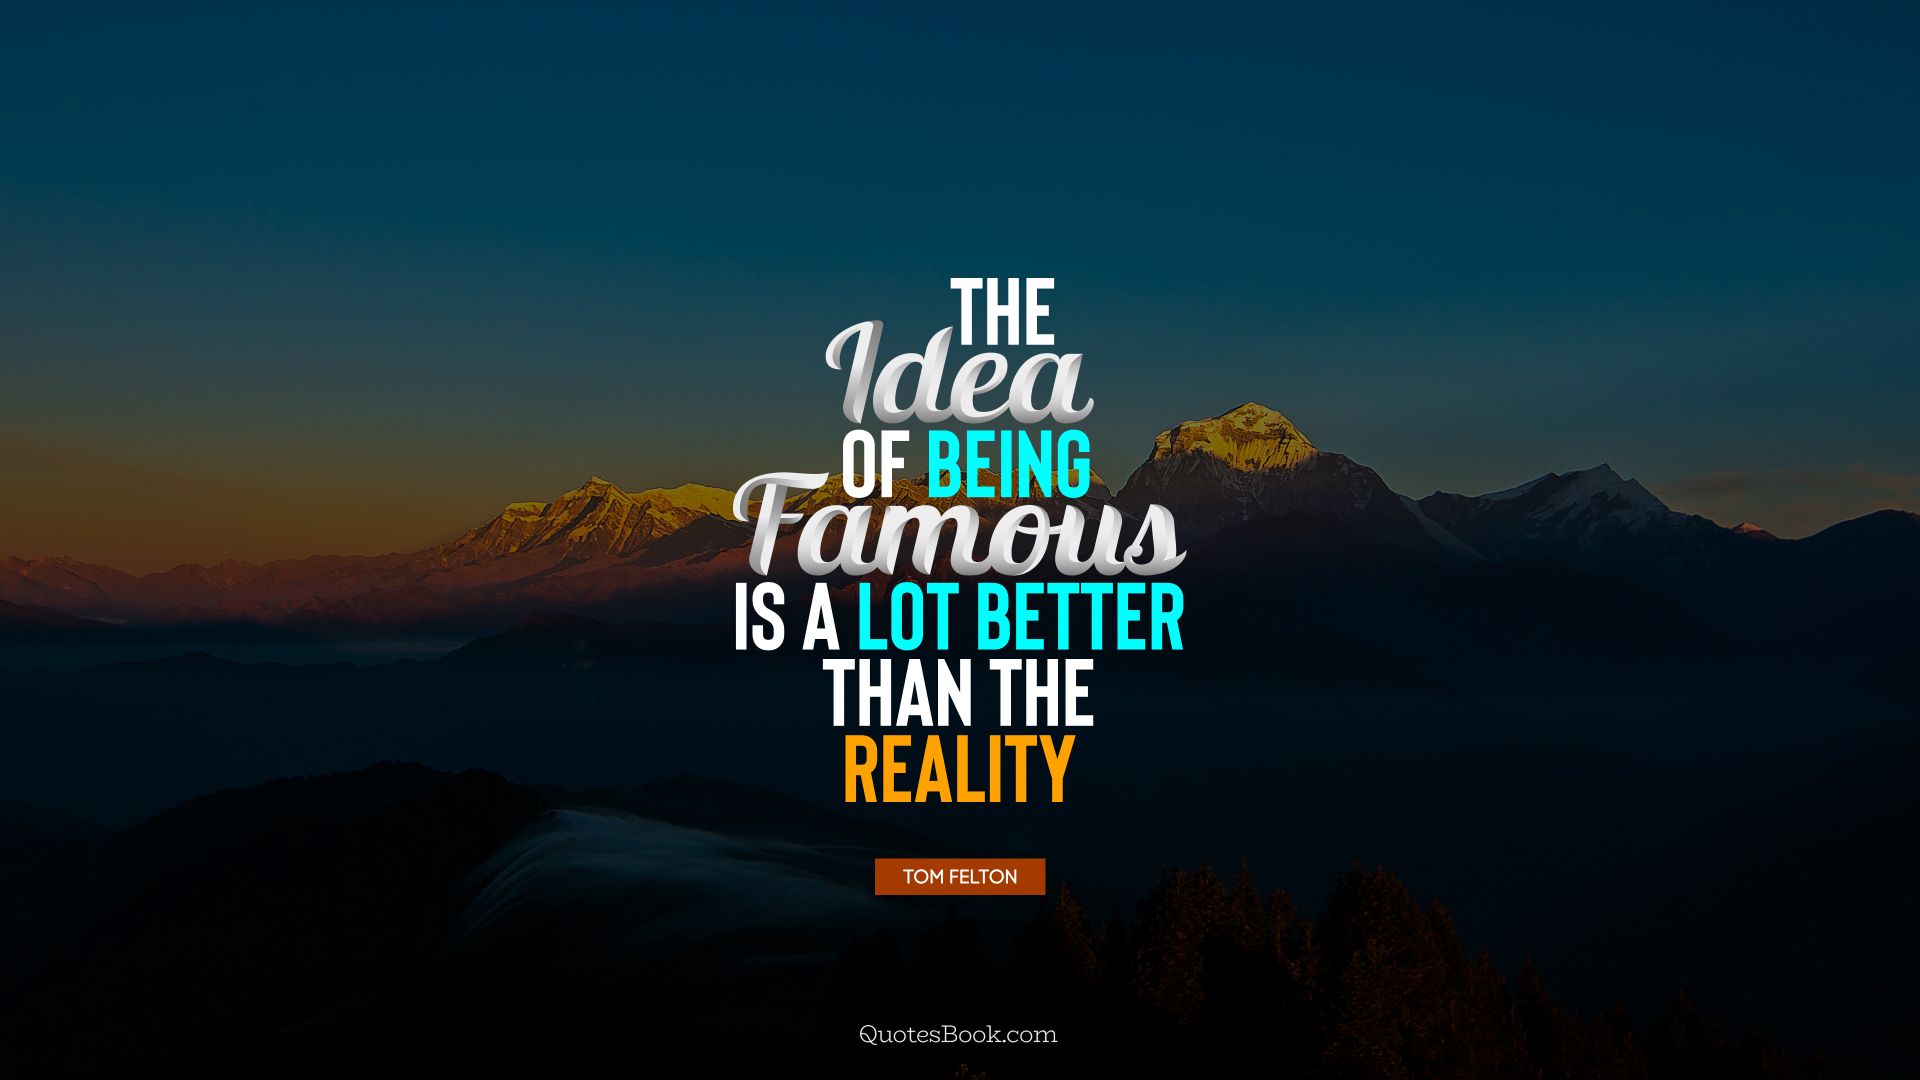 The idea of being famous is a lot better than the reality. - Quote by Tom Felton